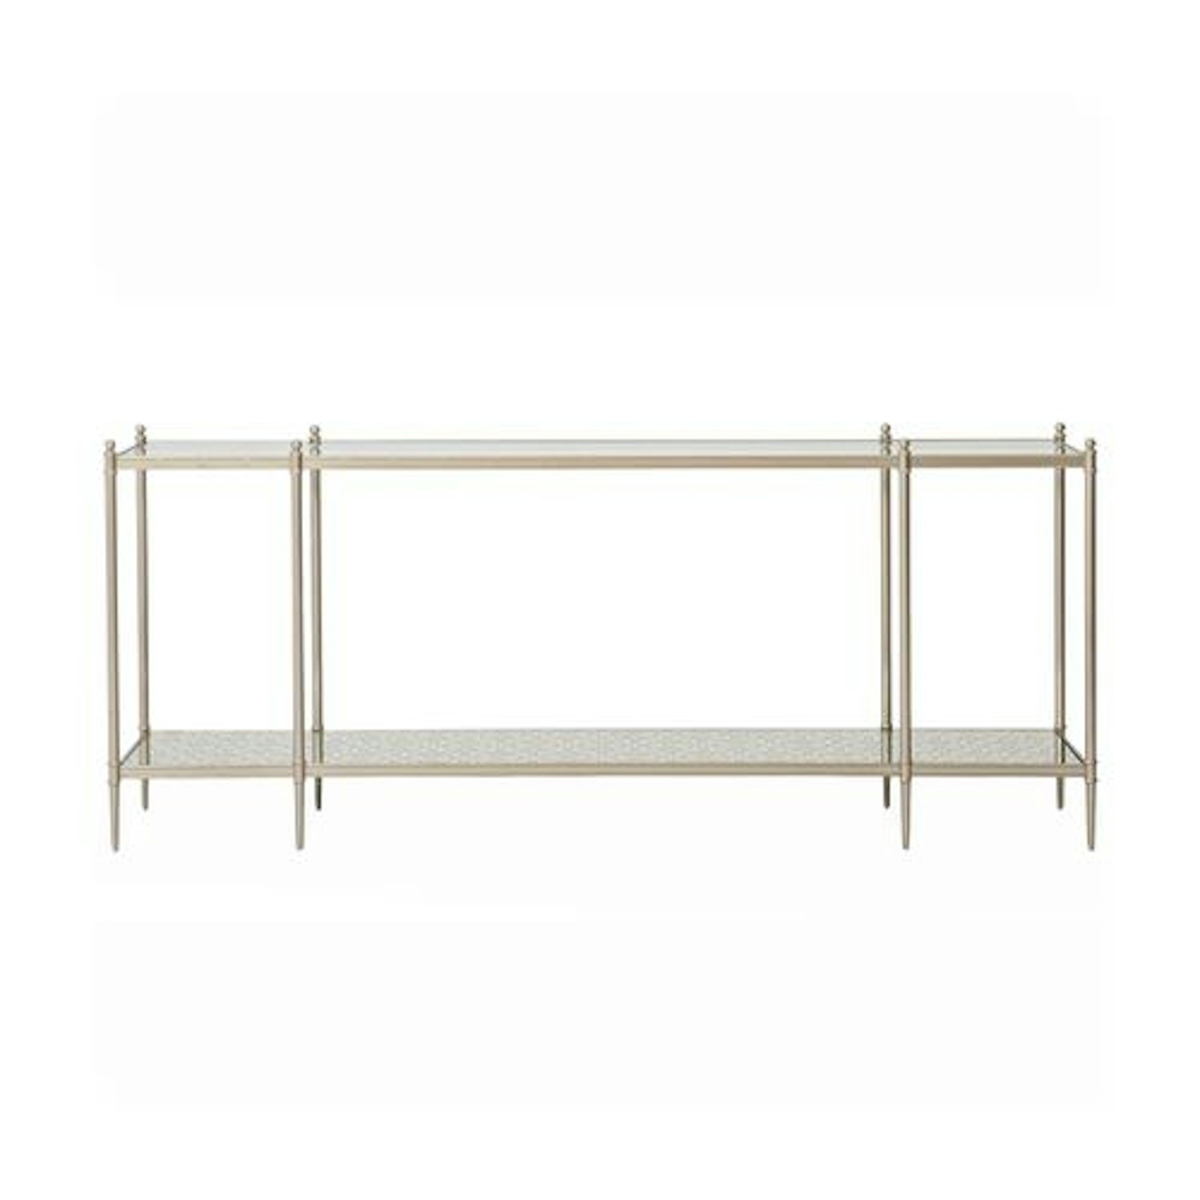 Console table with drawers | Shop console tables online at LuxDeco.com